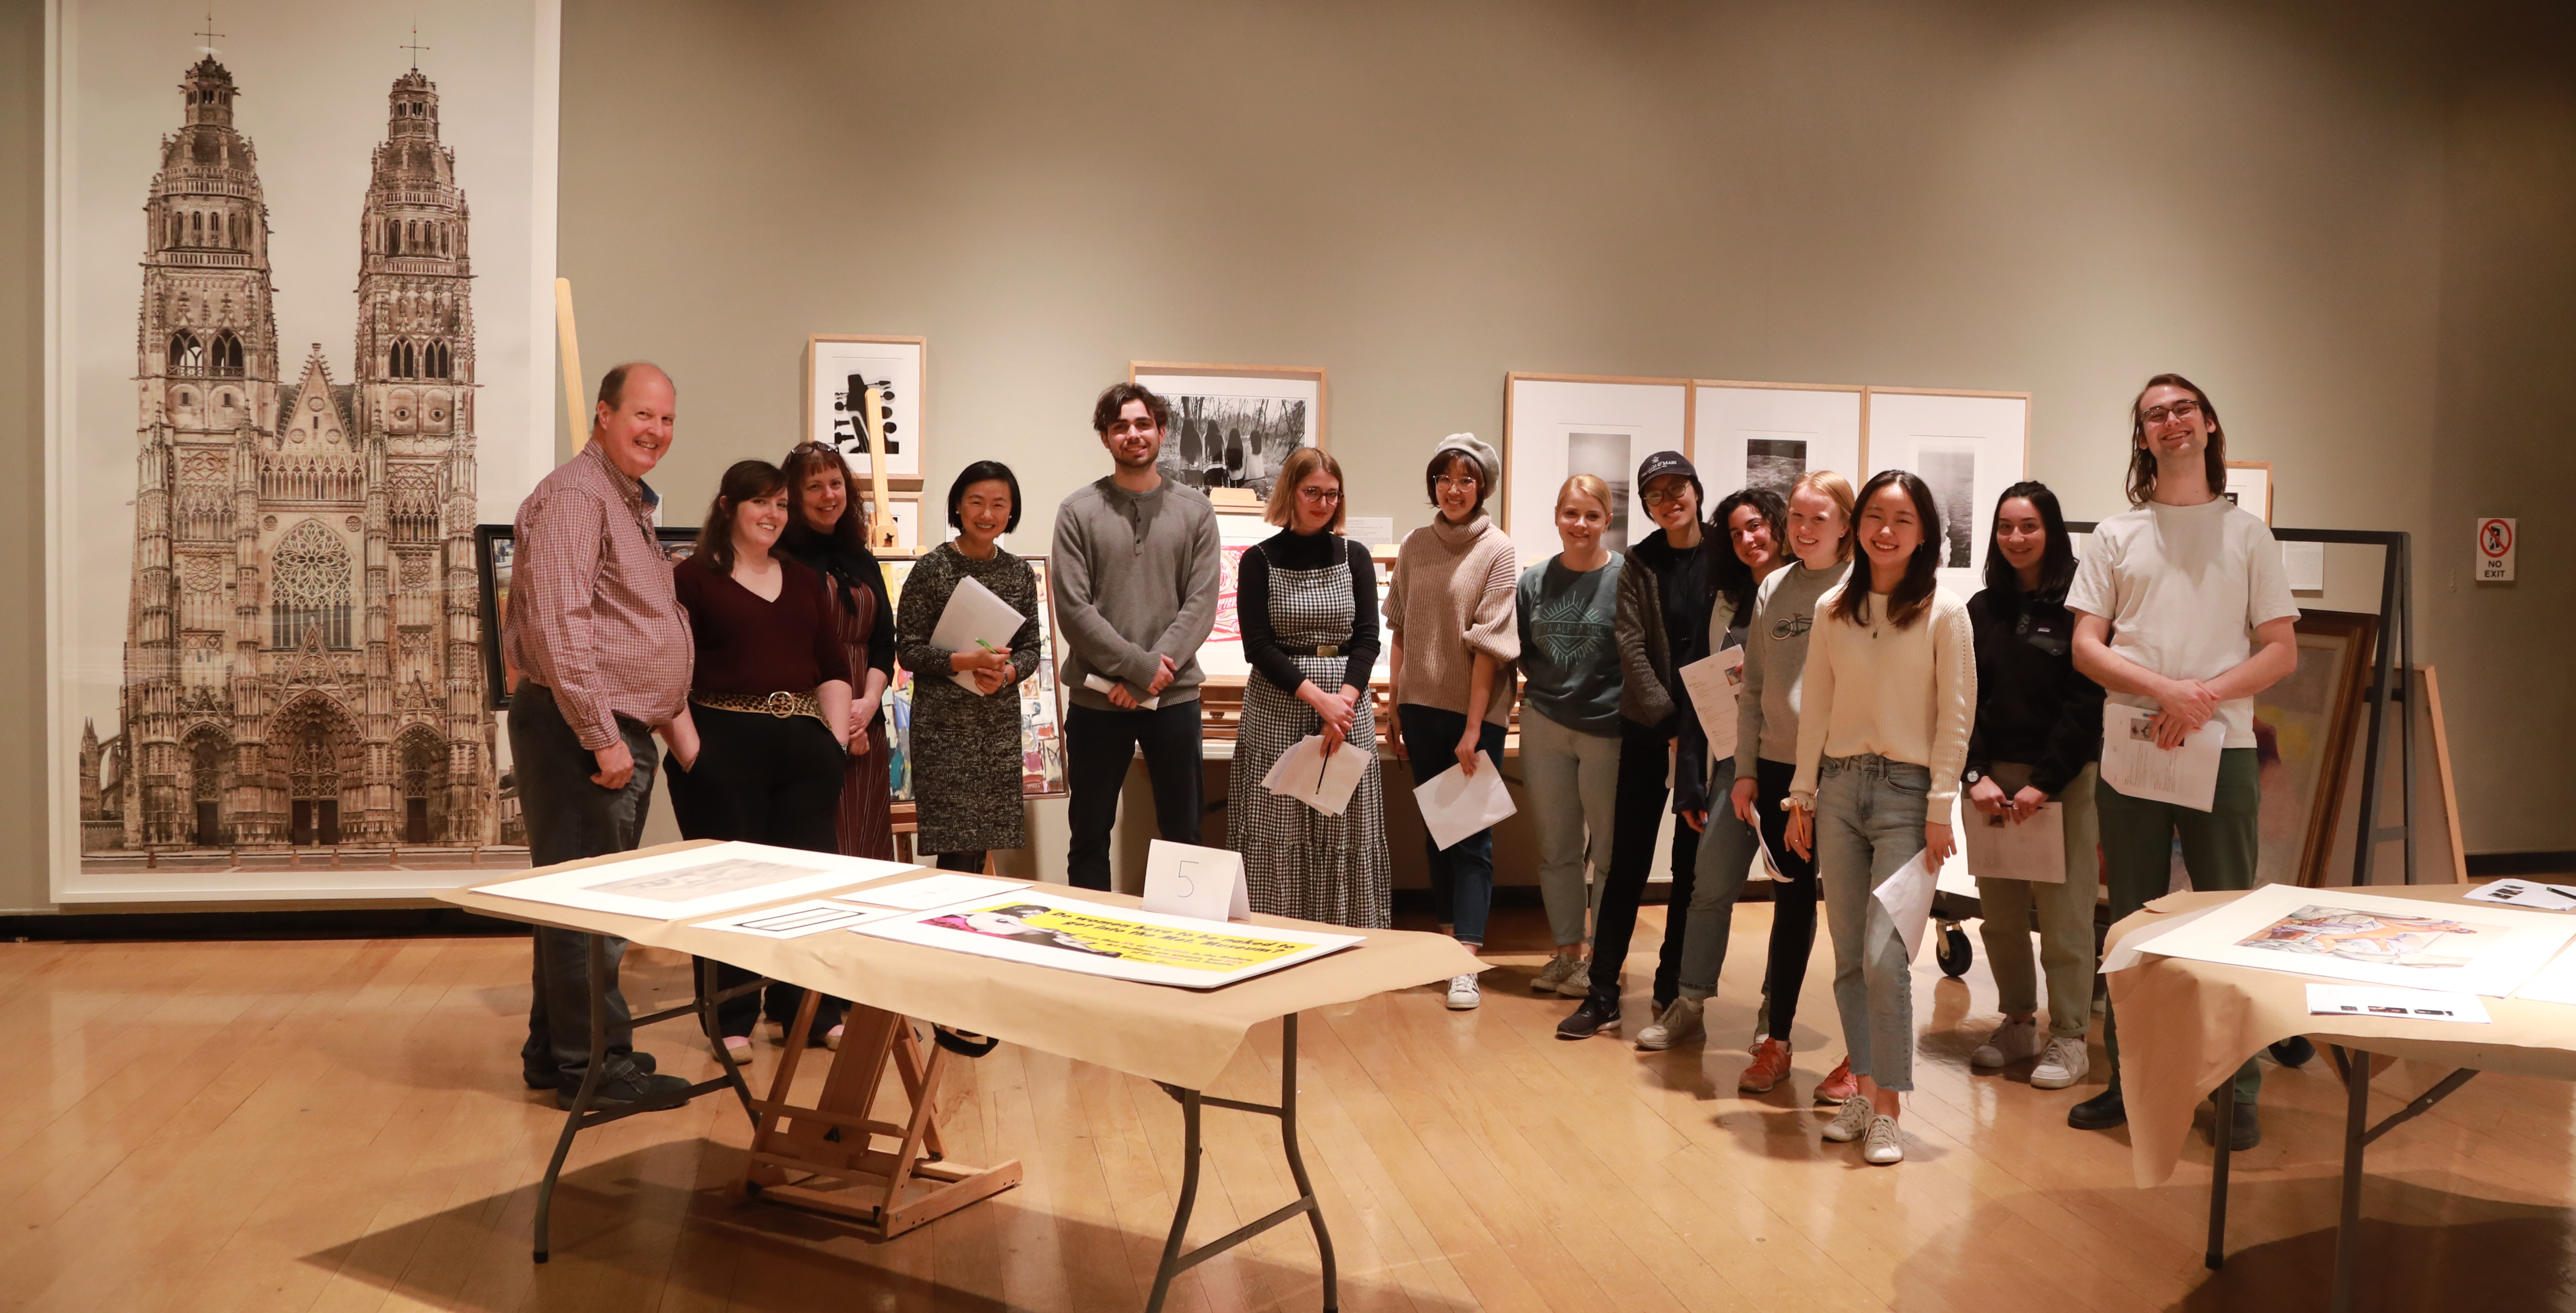 Art History Professor Xin Conan-Wu, and the majors in the "Curatorial Project", together with staff of the Muscarelle Museum (Melissa Parris, Laura Fogarty and Kevin Gilliam). 